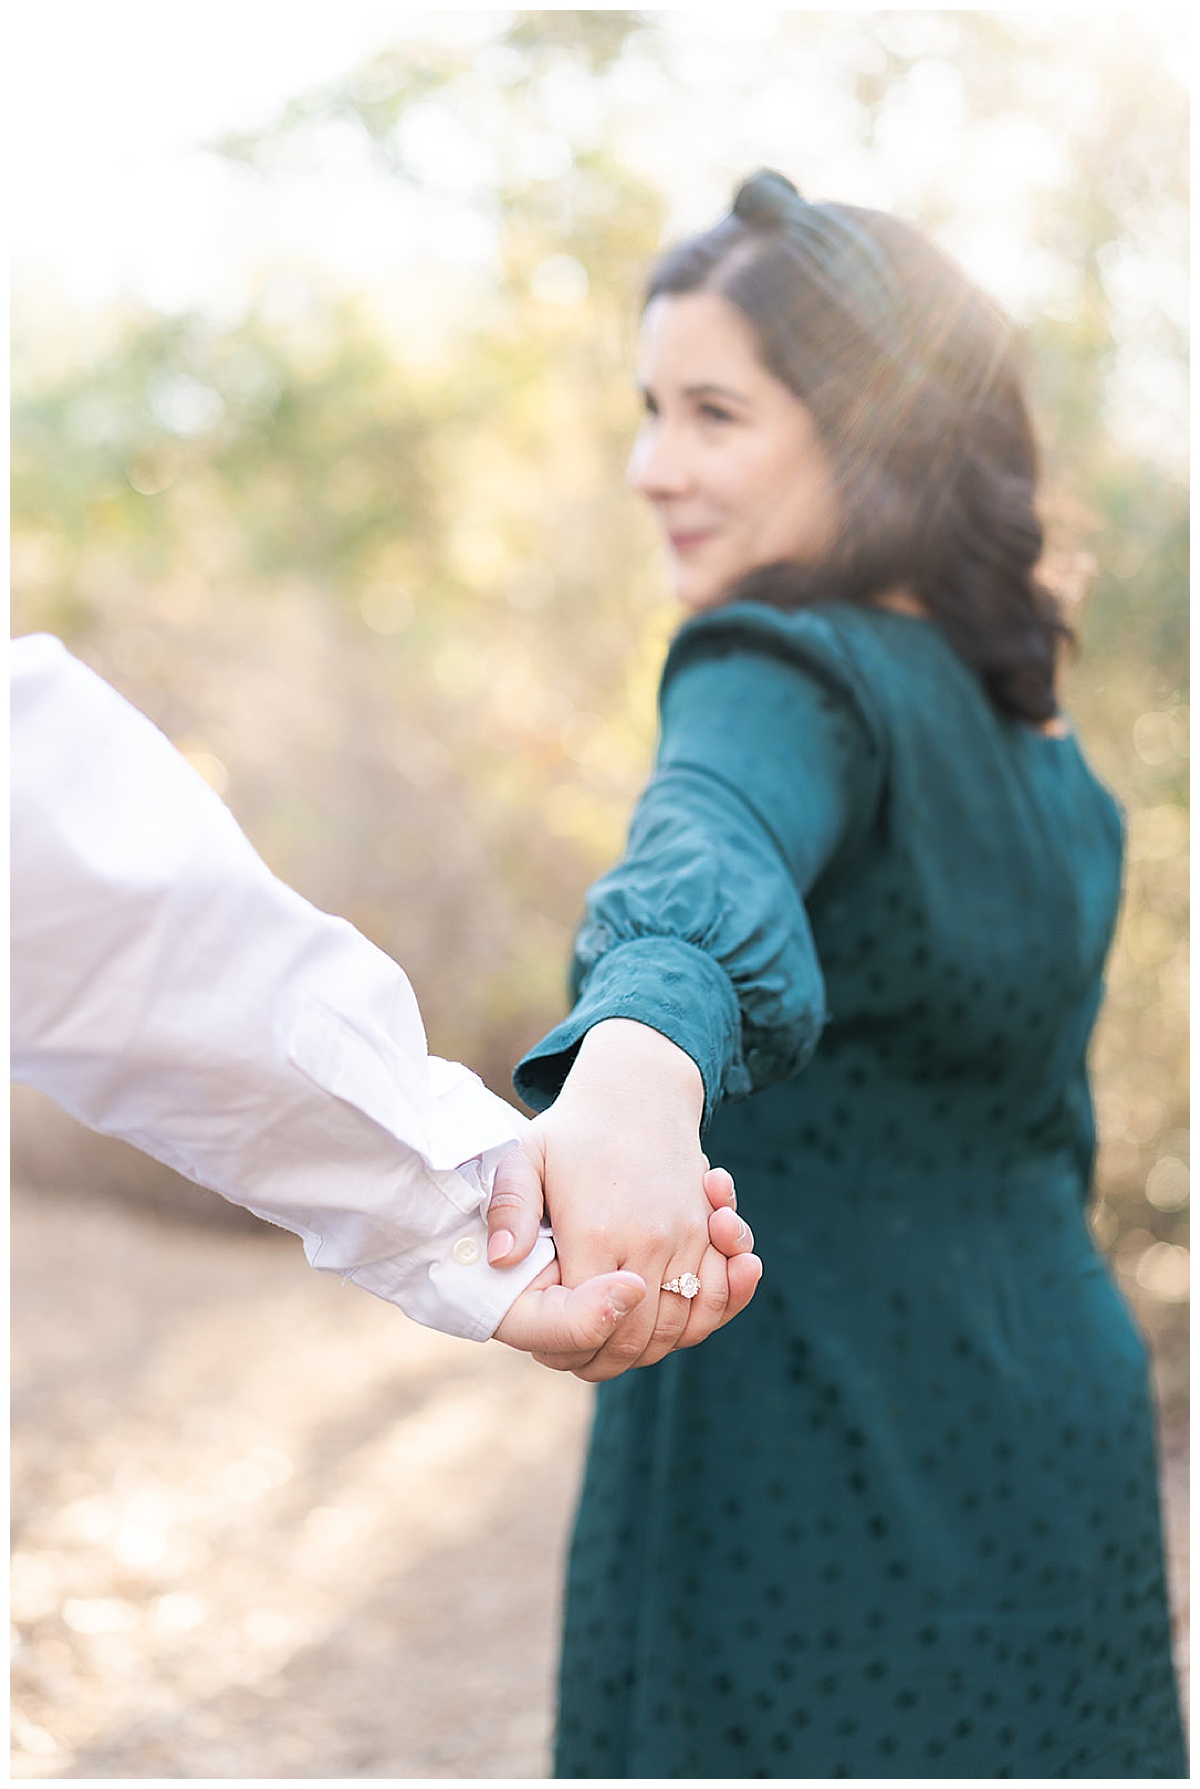 Stunning engagement ring during Ninfa’s Engagement Session